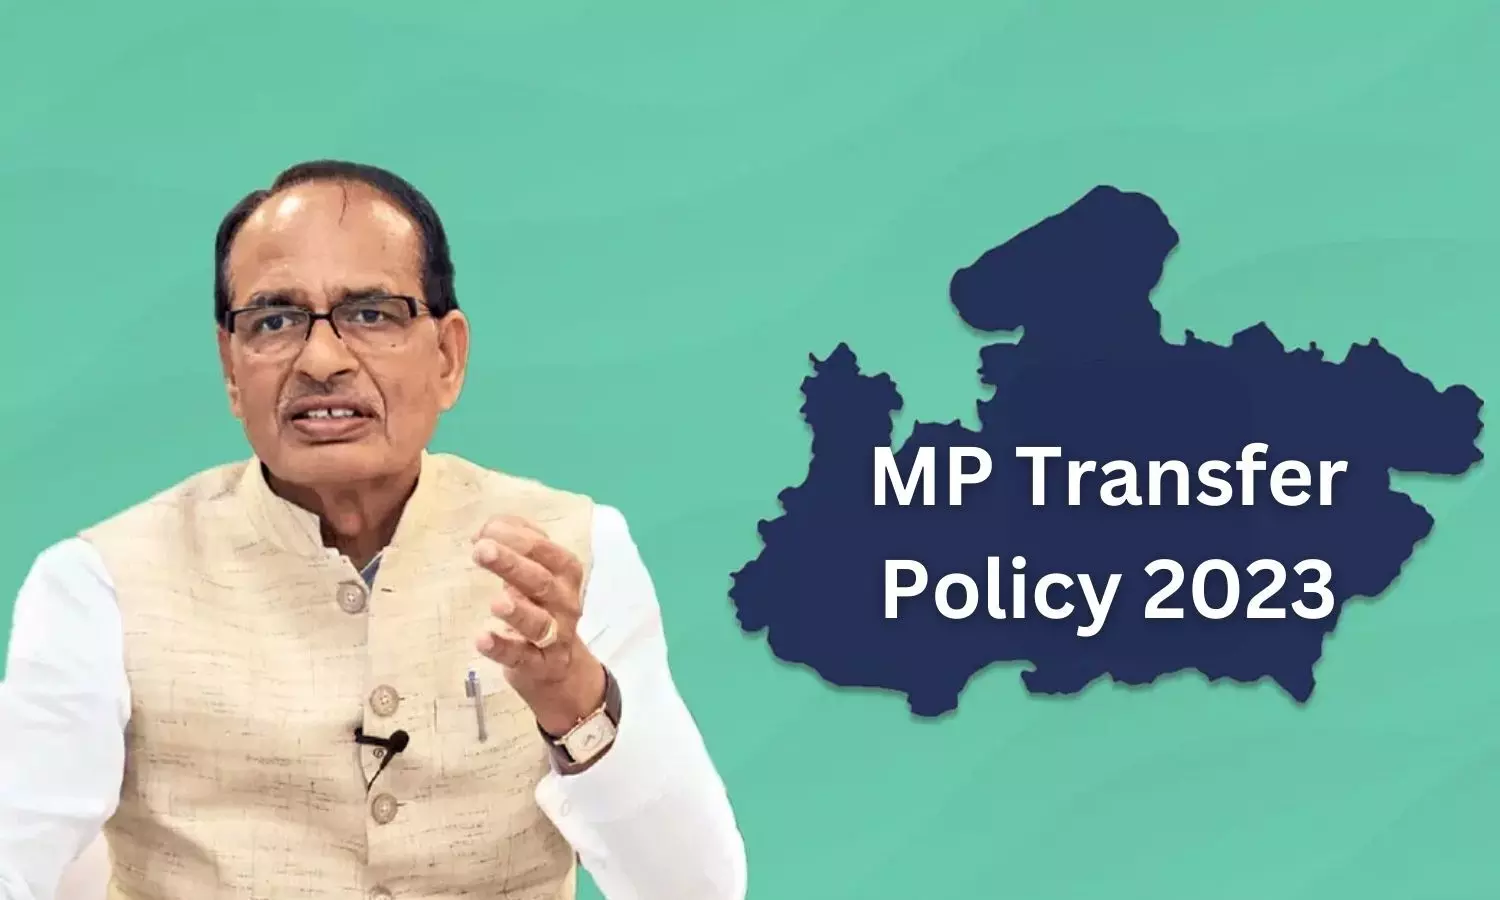 MP Transfer Policy 2023